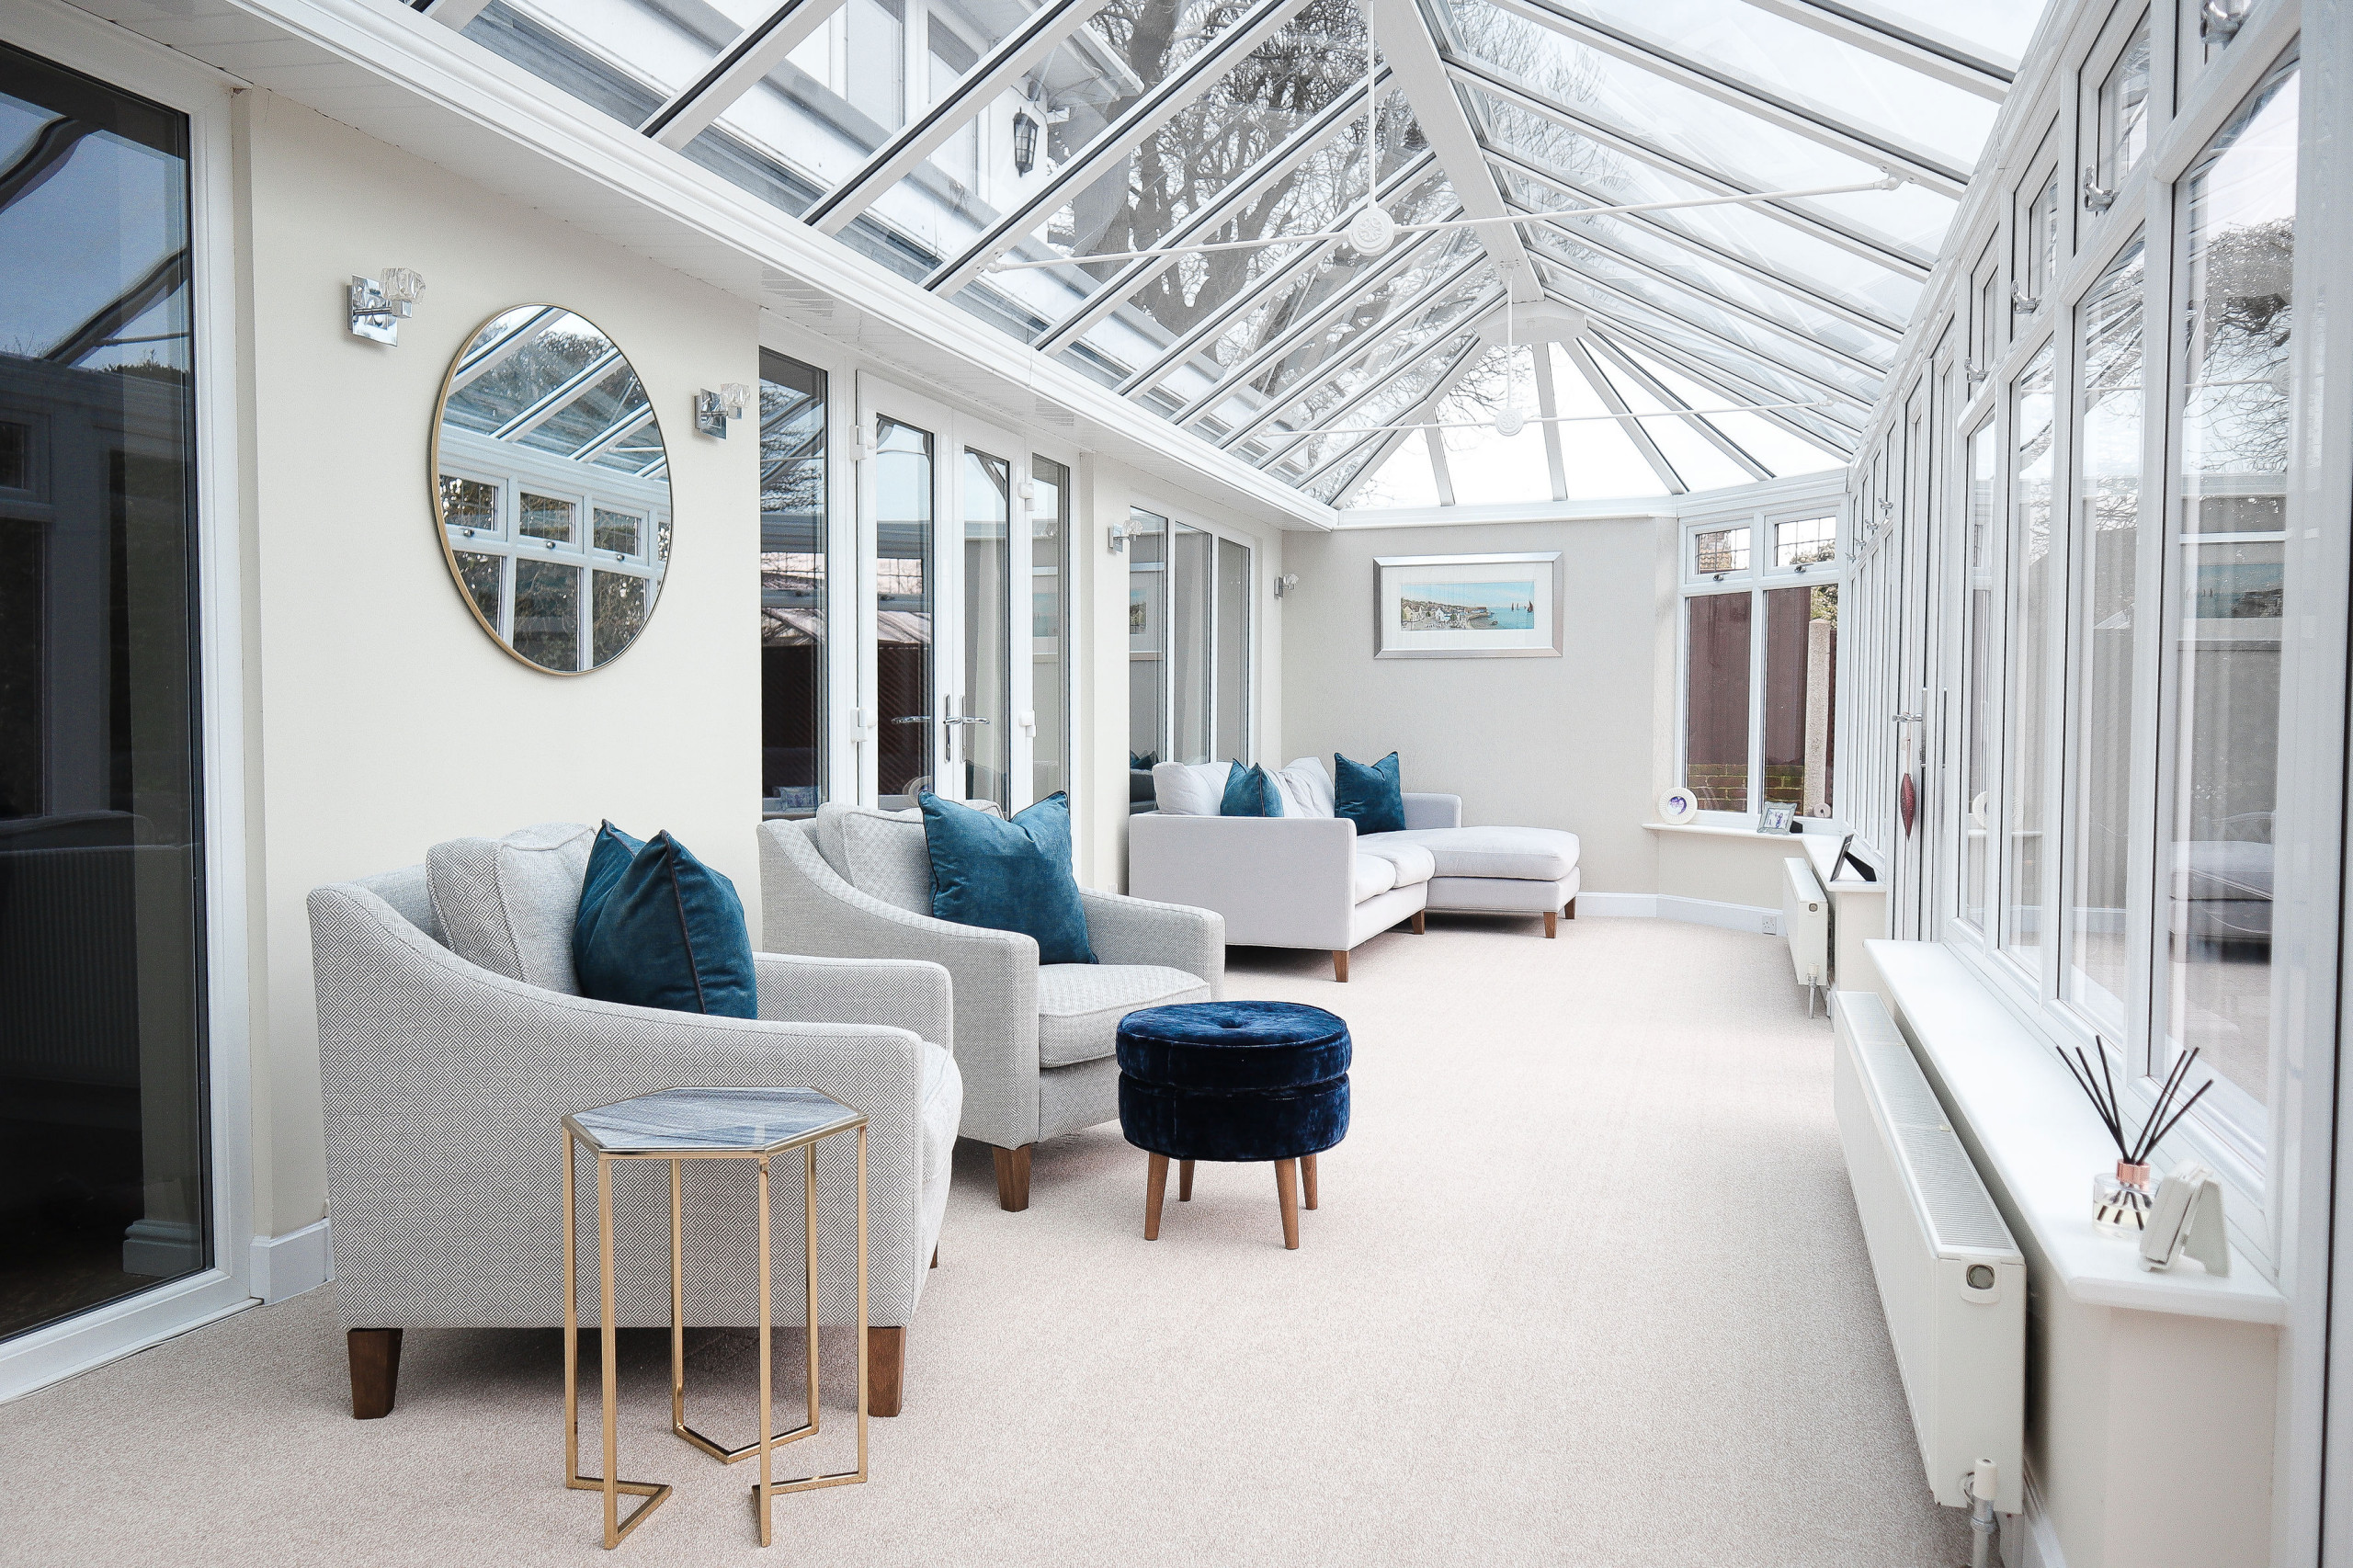 9 Conservatory Interior Ideas For Your Home